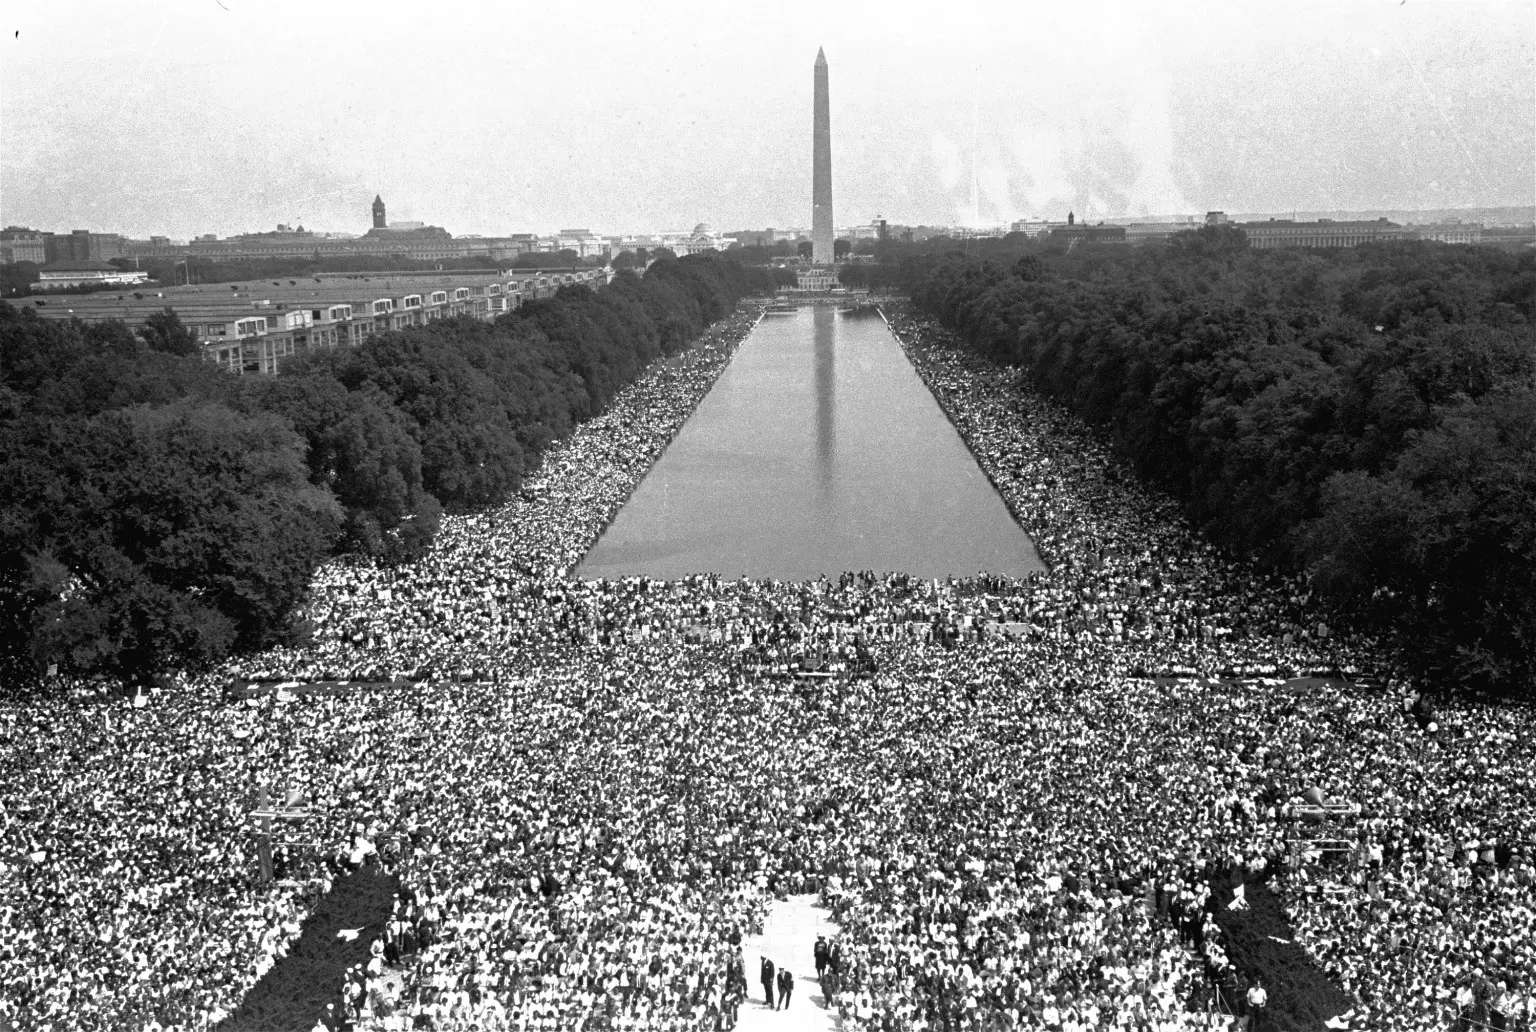 A large crowd of people gathered in front of the washington monument.